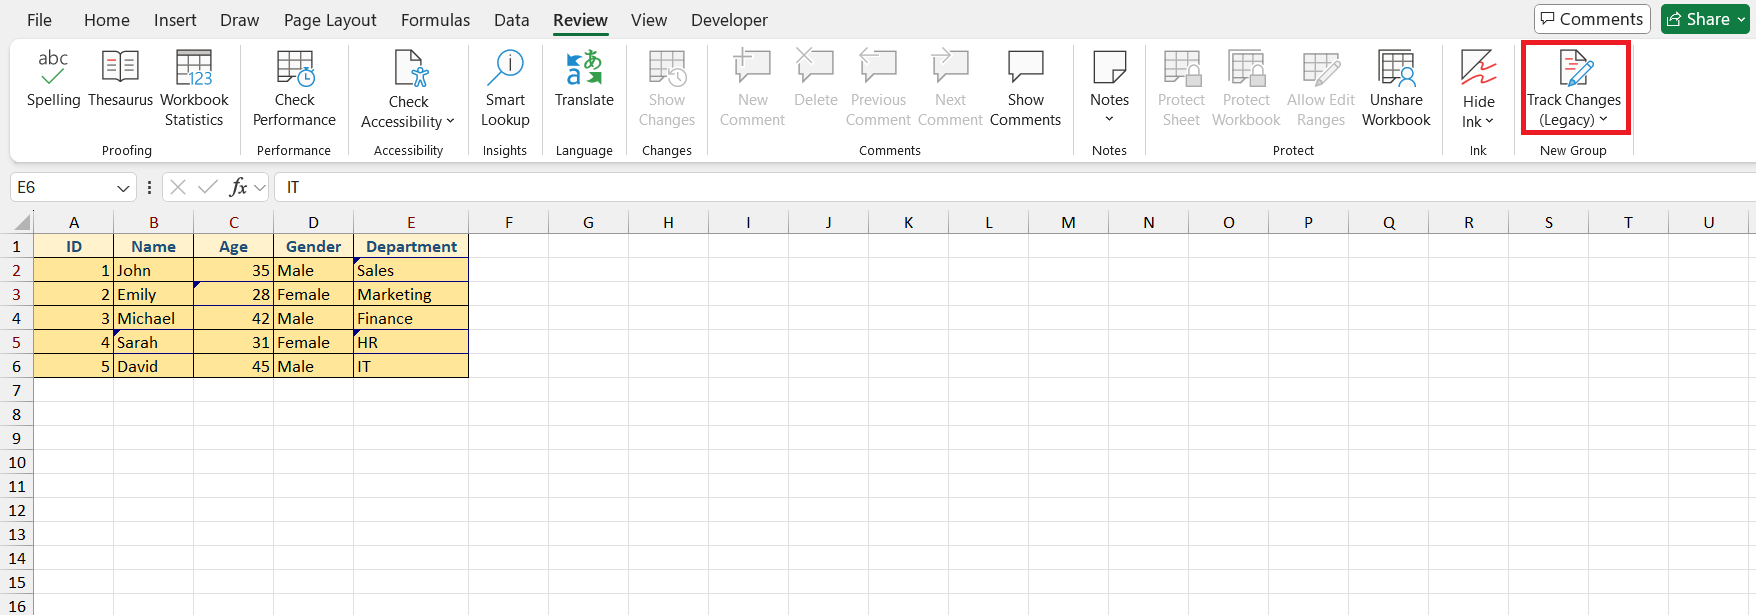 Track Changes in Excel